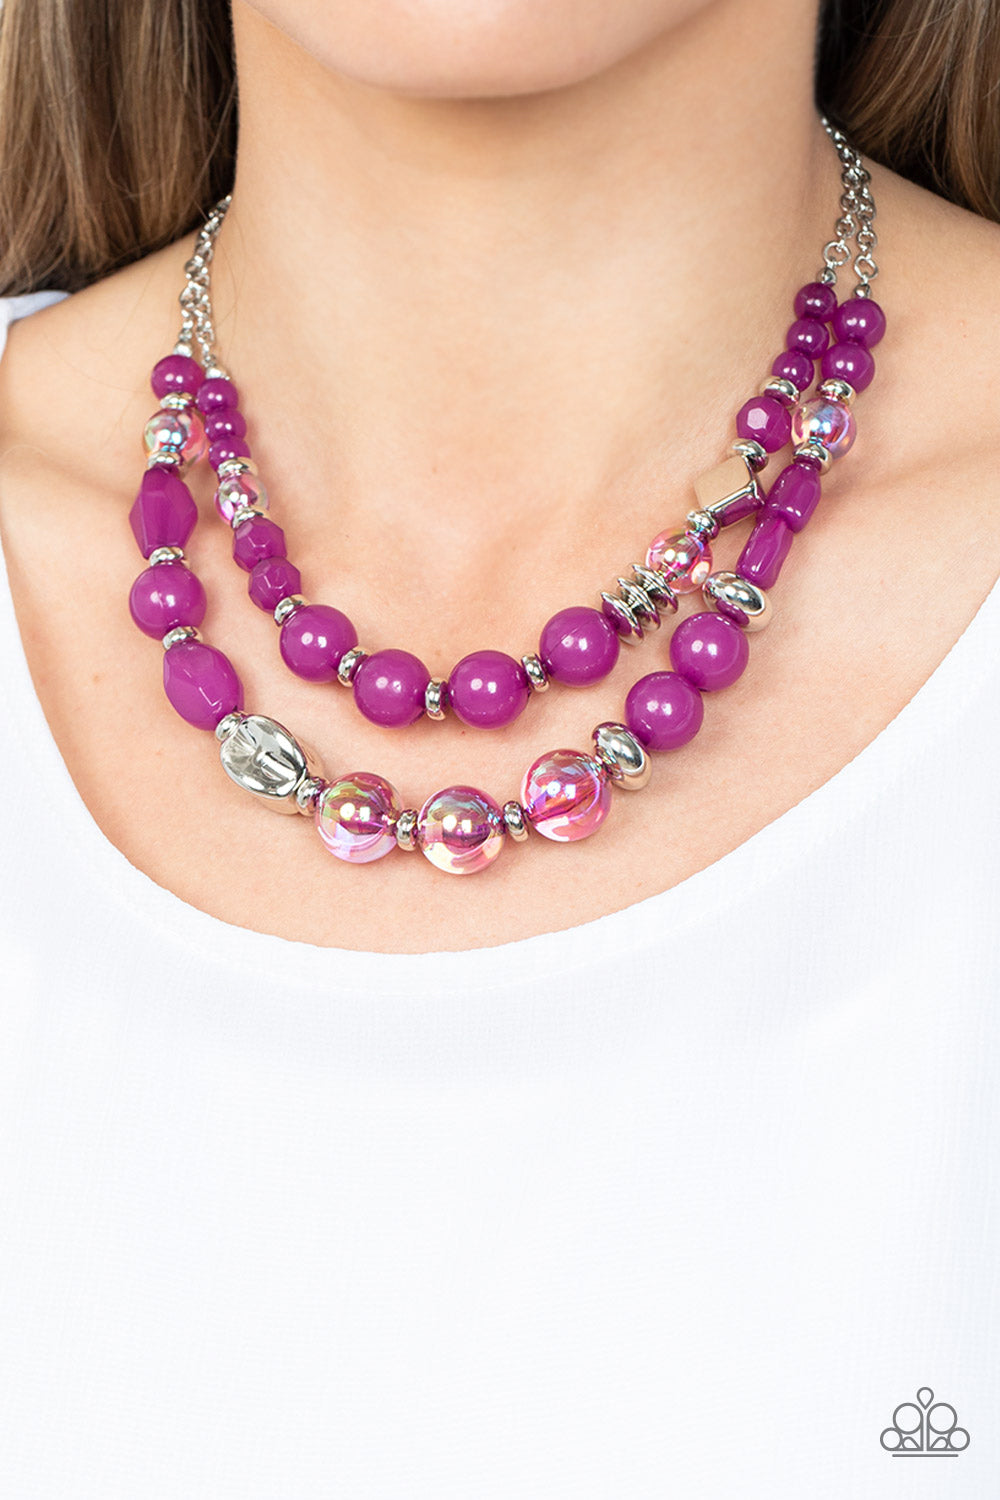 Paparazzi Accessories Mere Magic - Purple Featuring various shapes and finishes, a mismatched assortment of silver, iridescent, and opaque Dahlia beads have been threaded along invisible wires below the collar, creating ethereal layers. Features an adjust